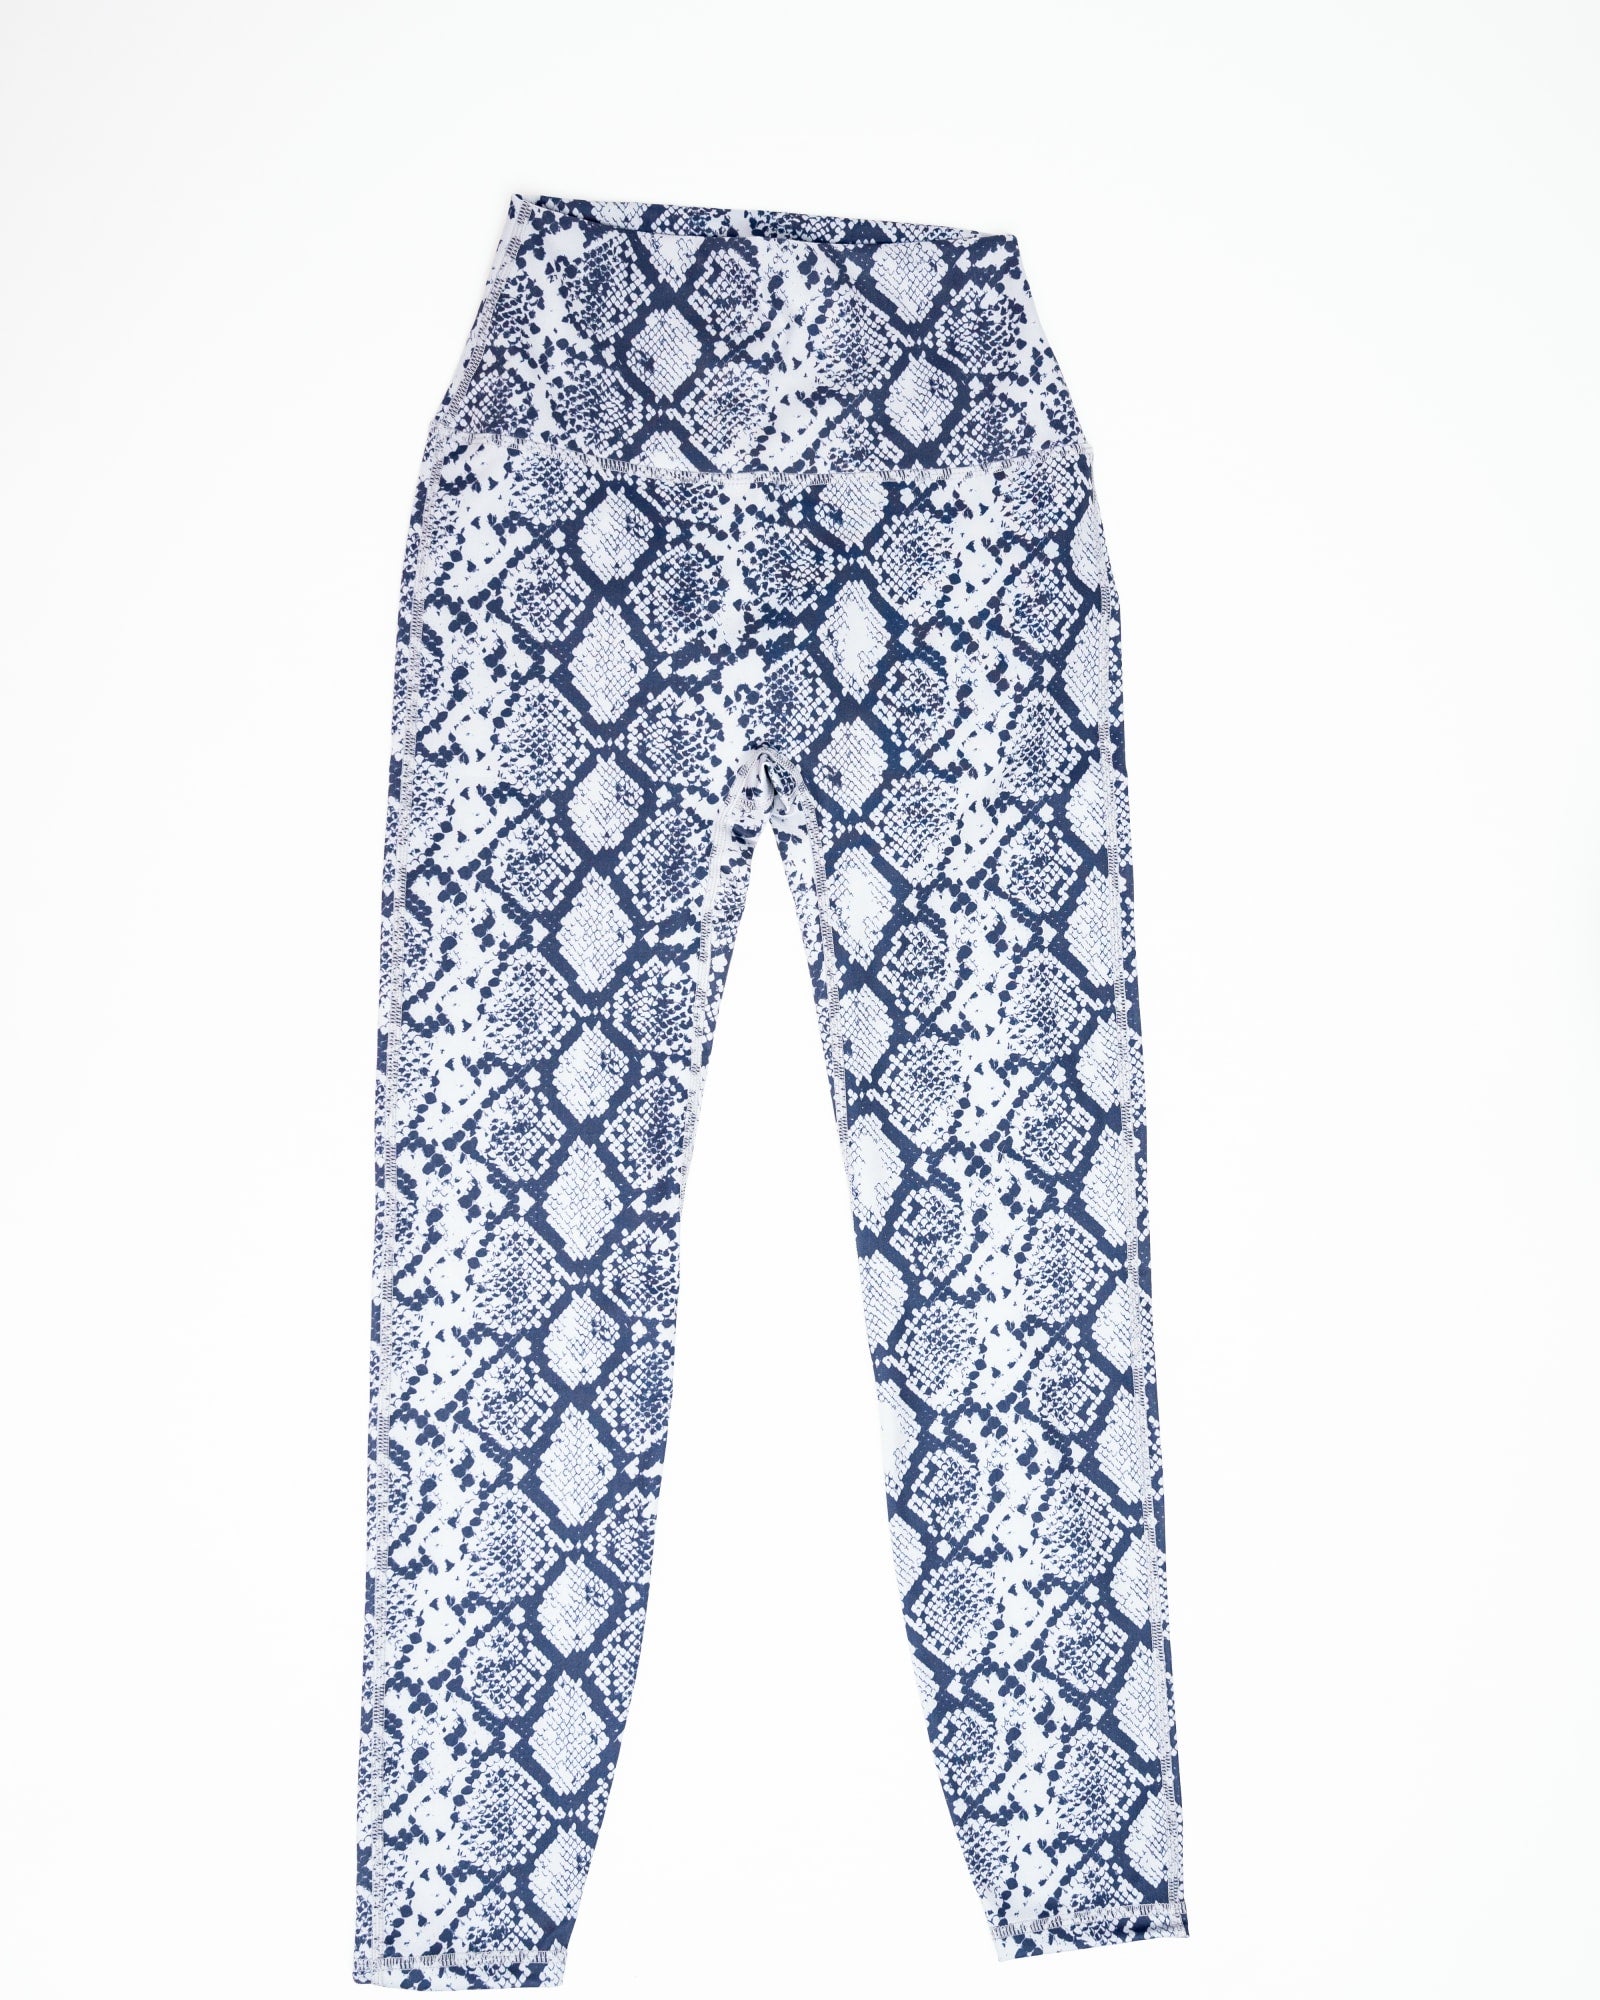 Classic Venus High Waisted Legging - Limited Editions | Azure Snakeskin